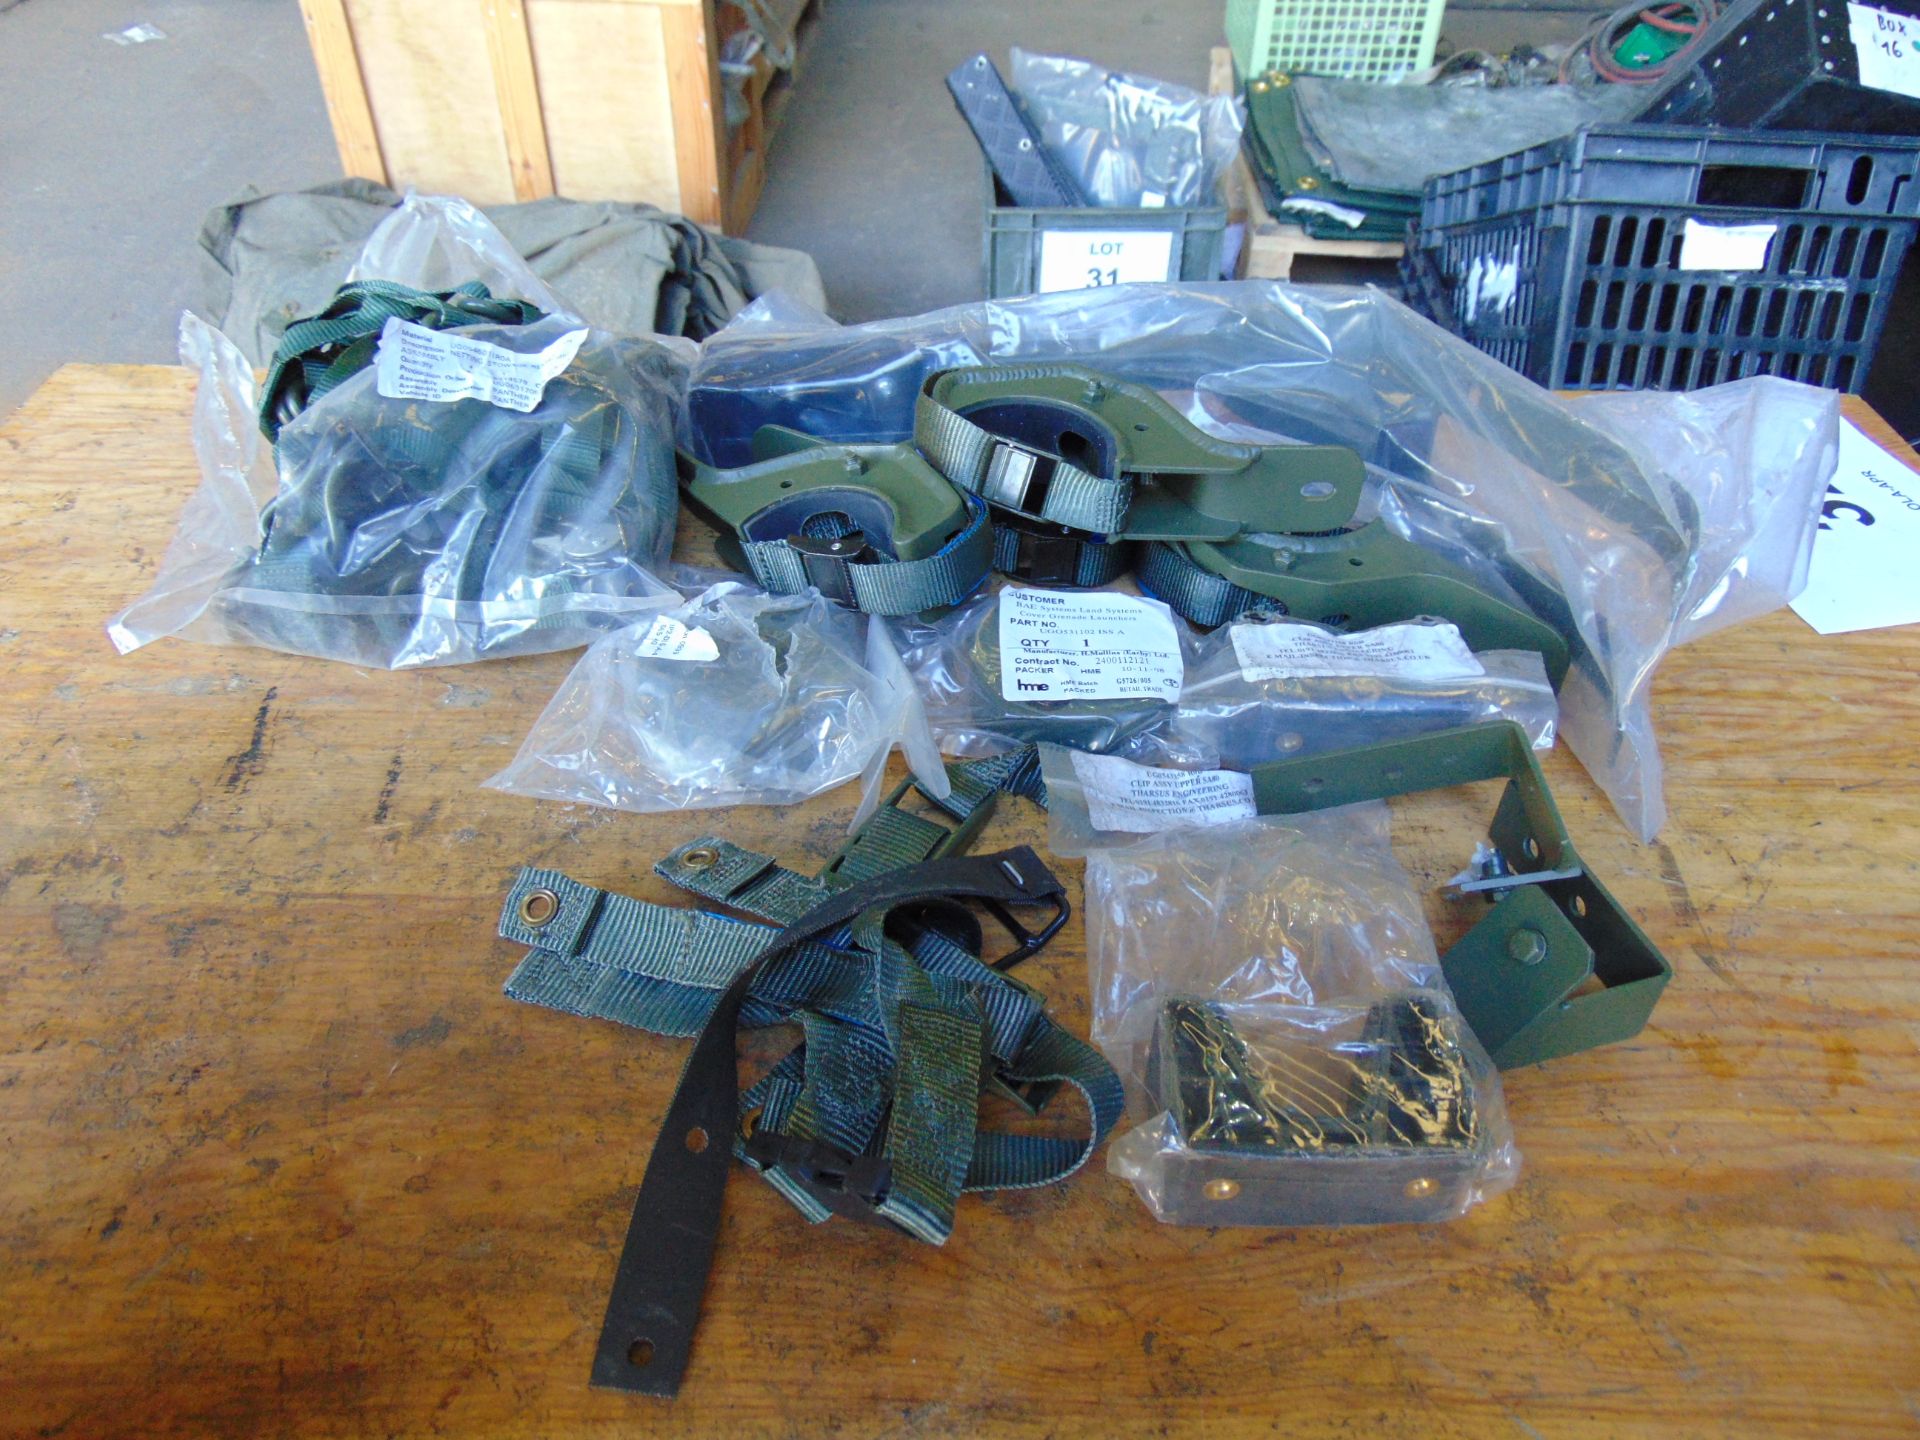 New Unissued WIMIK SA 80 Clips Launcher Covers, Stowage Straps, Barrel Clamps etc - Image 2 of 9